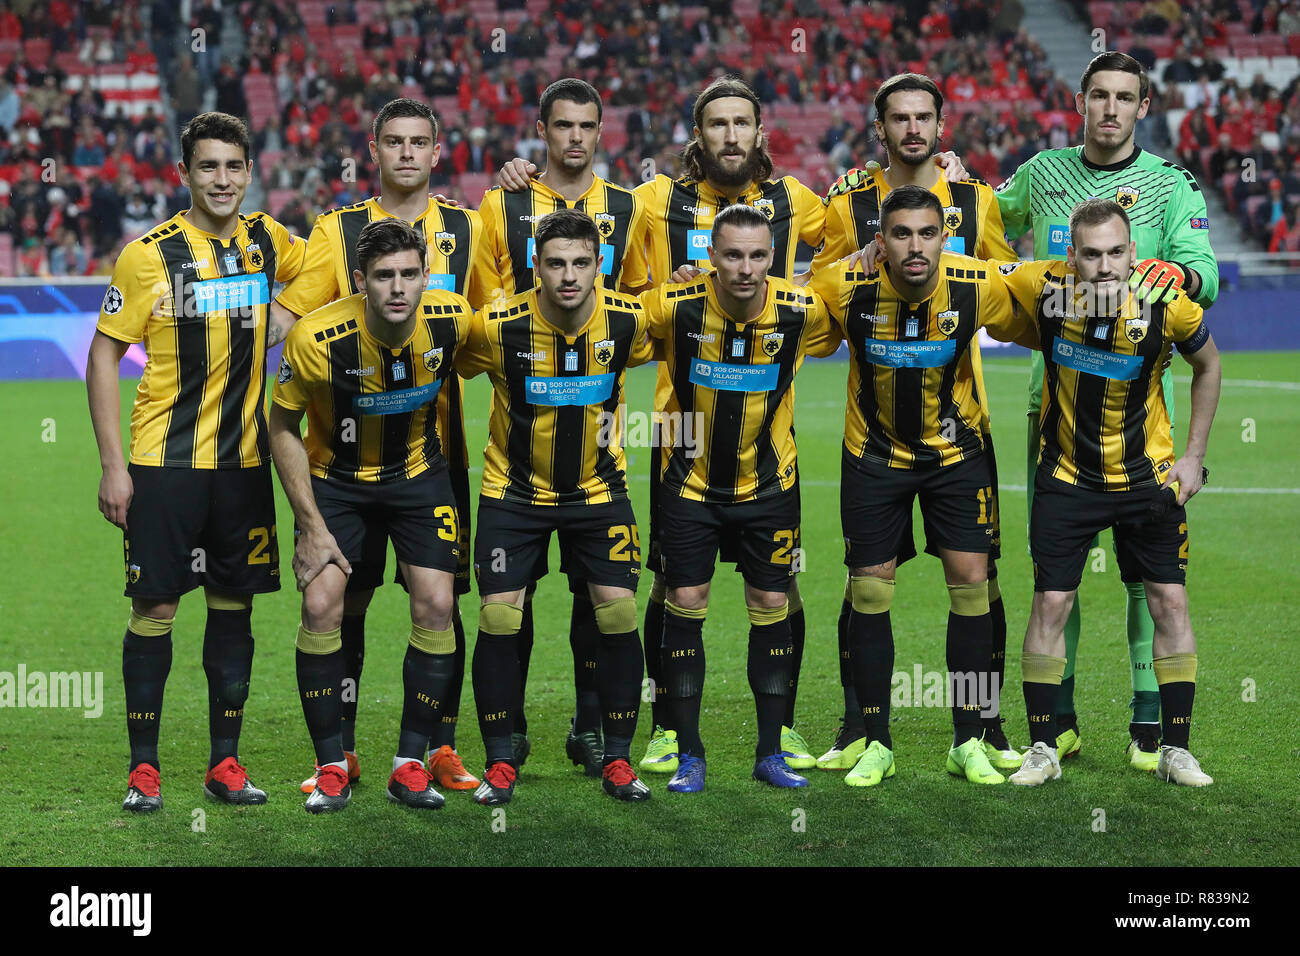 Lisbon, Portugal. 12th Dec, 2018. Lineup of the AEK Athens F.C. team during  the UEFA Champions League 2018/19 football match between SL Benfica vs AEK  Athens F.C. Credit: David Martins/SOPA Images/ZUMA Wire/Alamy